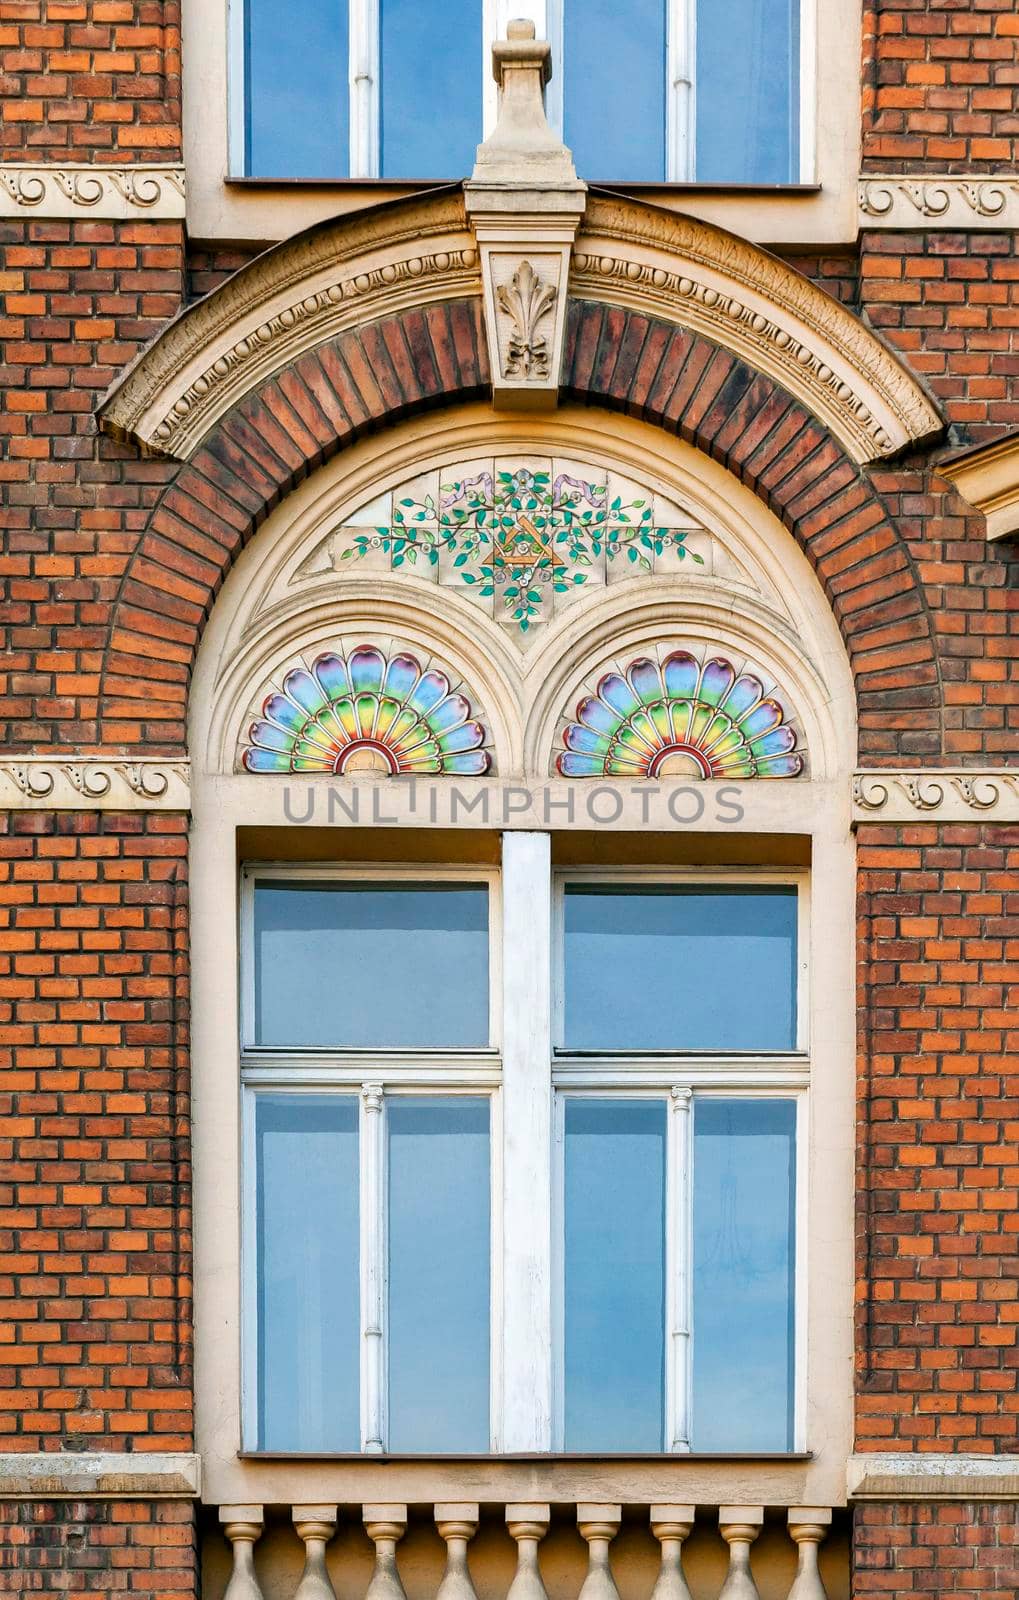 Ornate window of an old brick building